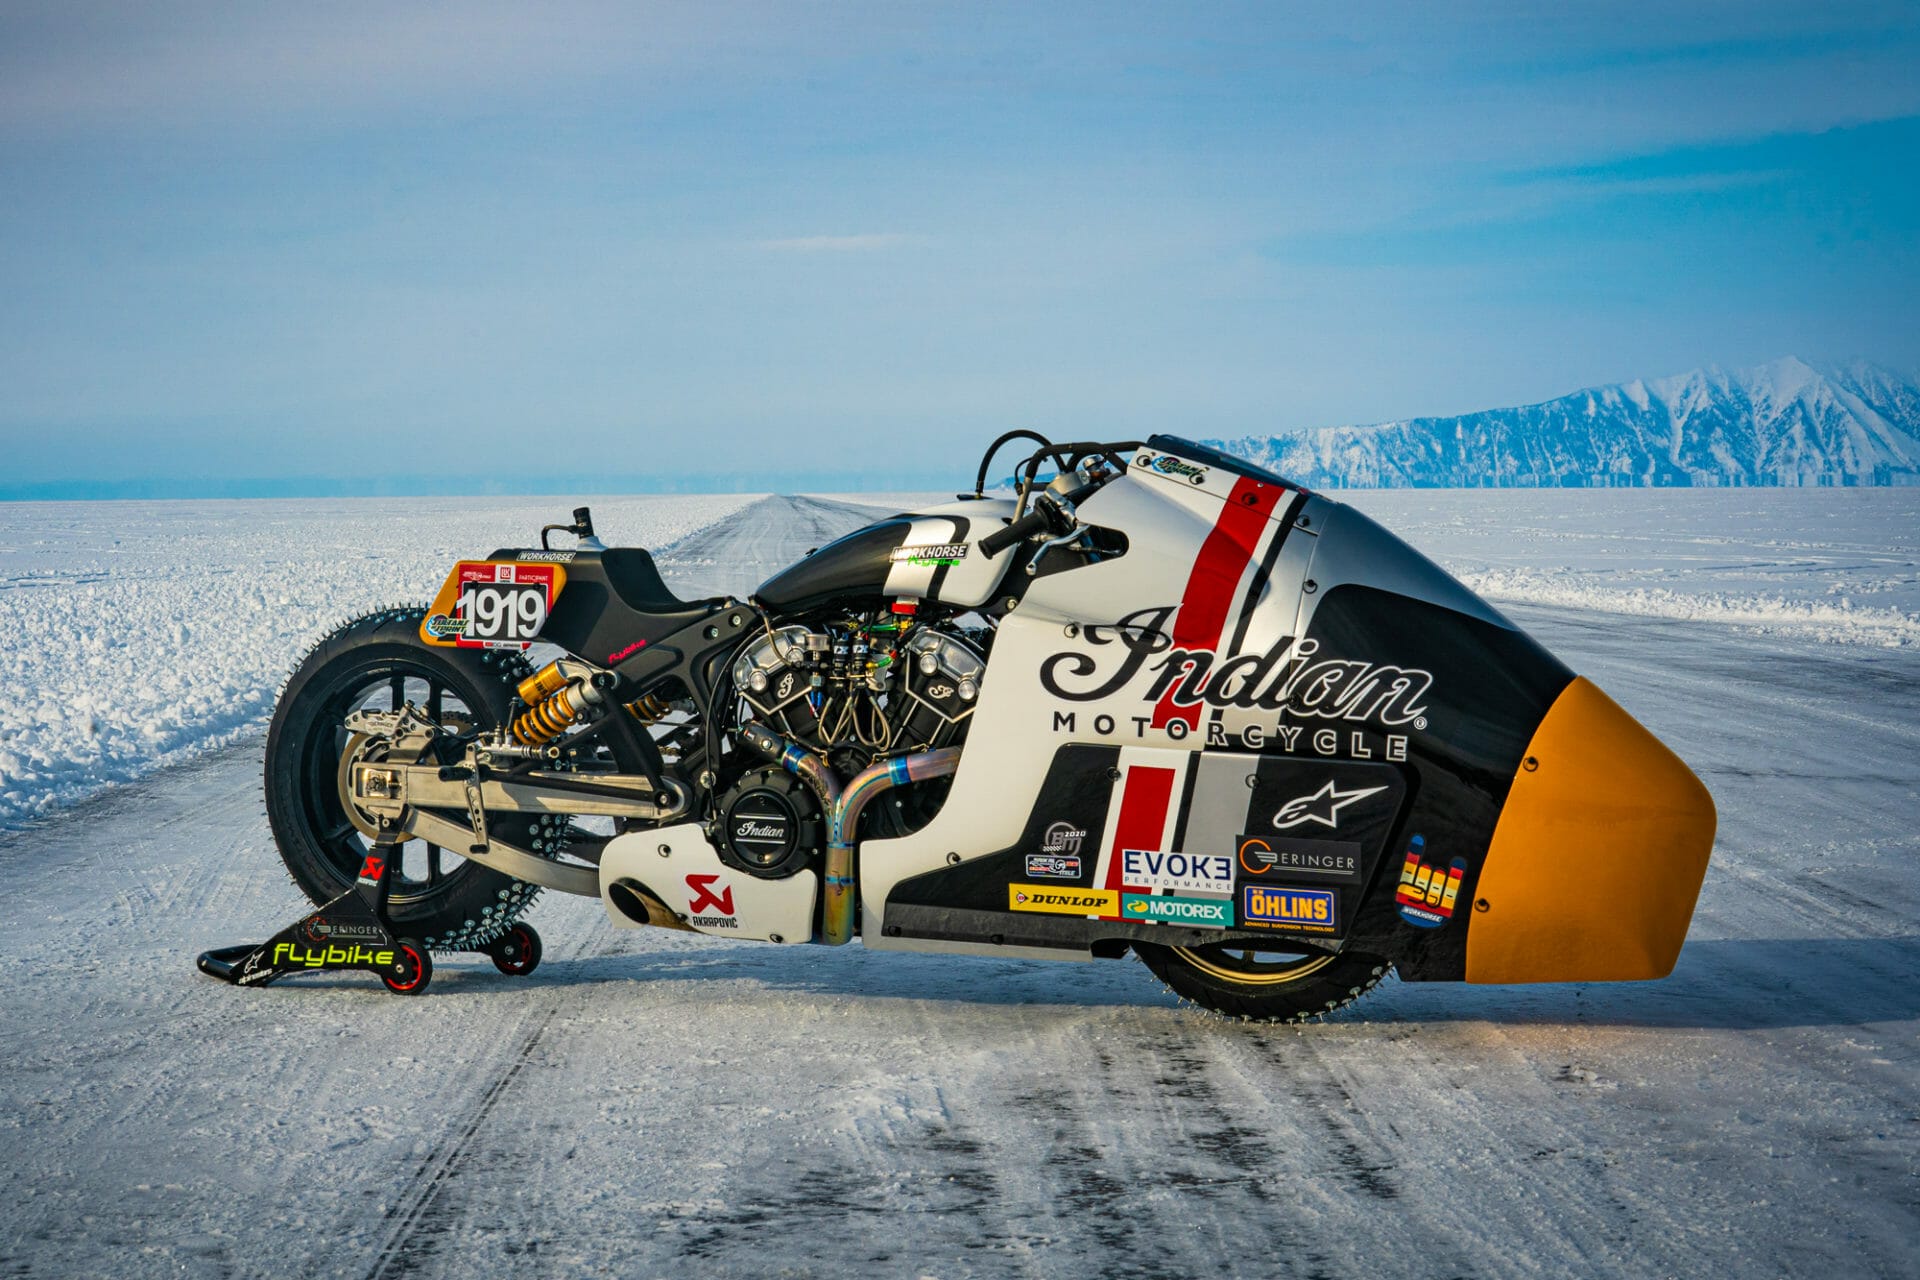 Indian Appaloosa v2.0 at the Baikal Mile Ice Speed Festival 2020
- also in the MOTORCYCLE NEWS APP